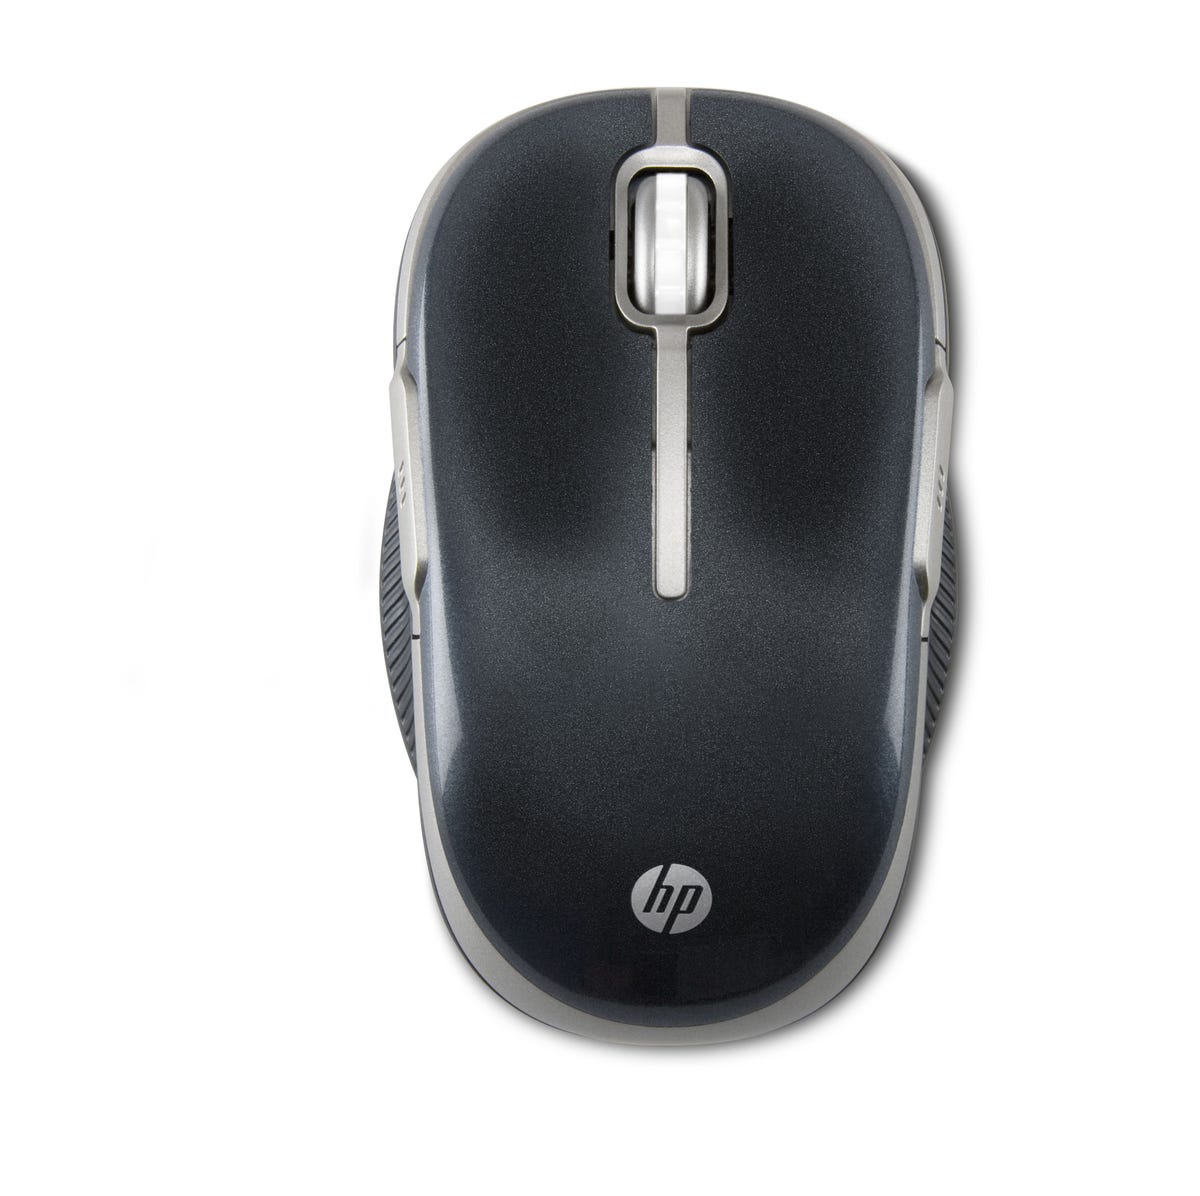 HP's new WiFi Mobile Mouse.